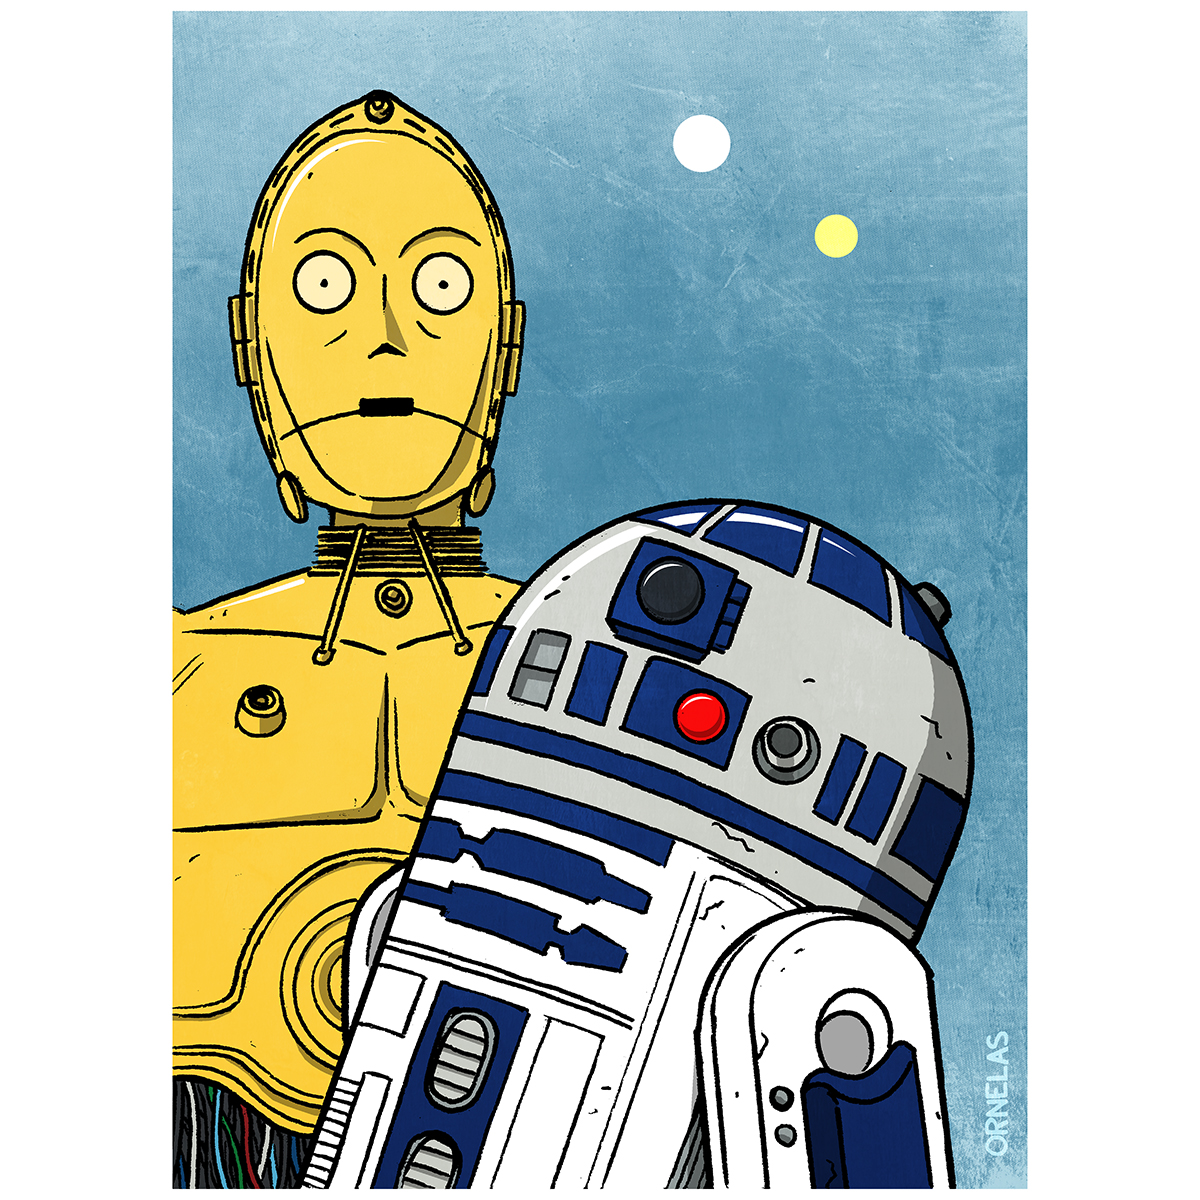 May The Second Be With You #BuyOrnelasArt #commissionsopen #comicbooks #comix #supportlocalartists #shopsmall #supportindieartists #starwarsart #maythe4thbewithyou #maythefourth #StarWarsDroids #c3Po #R2D2 #Tatooine